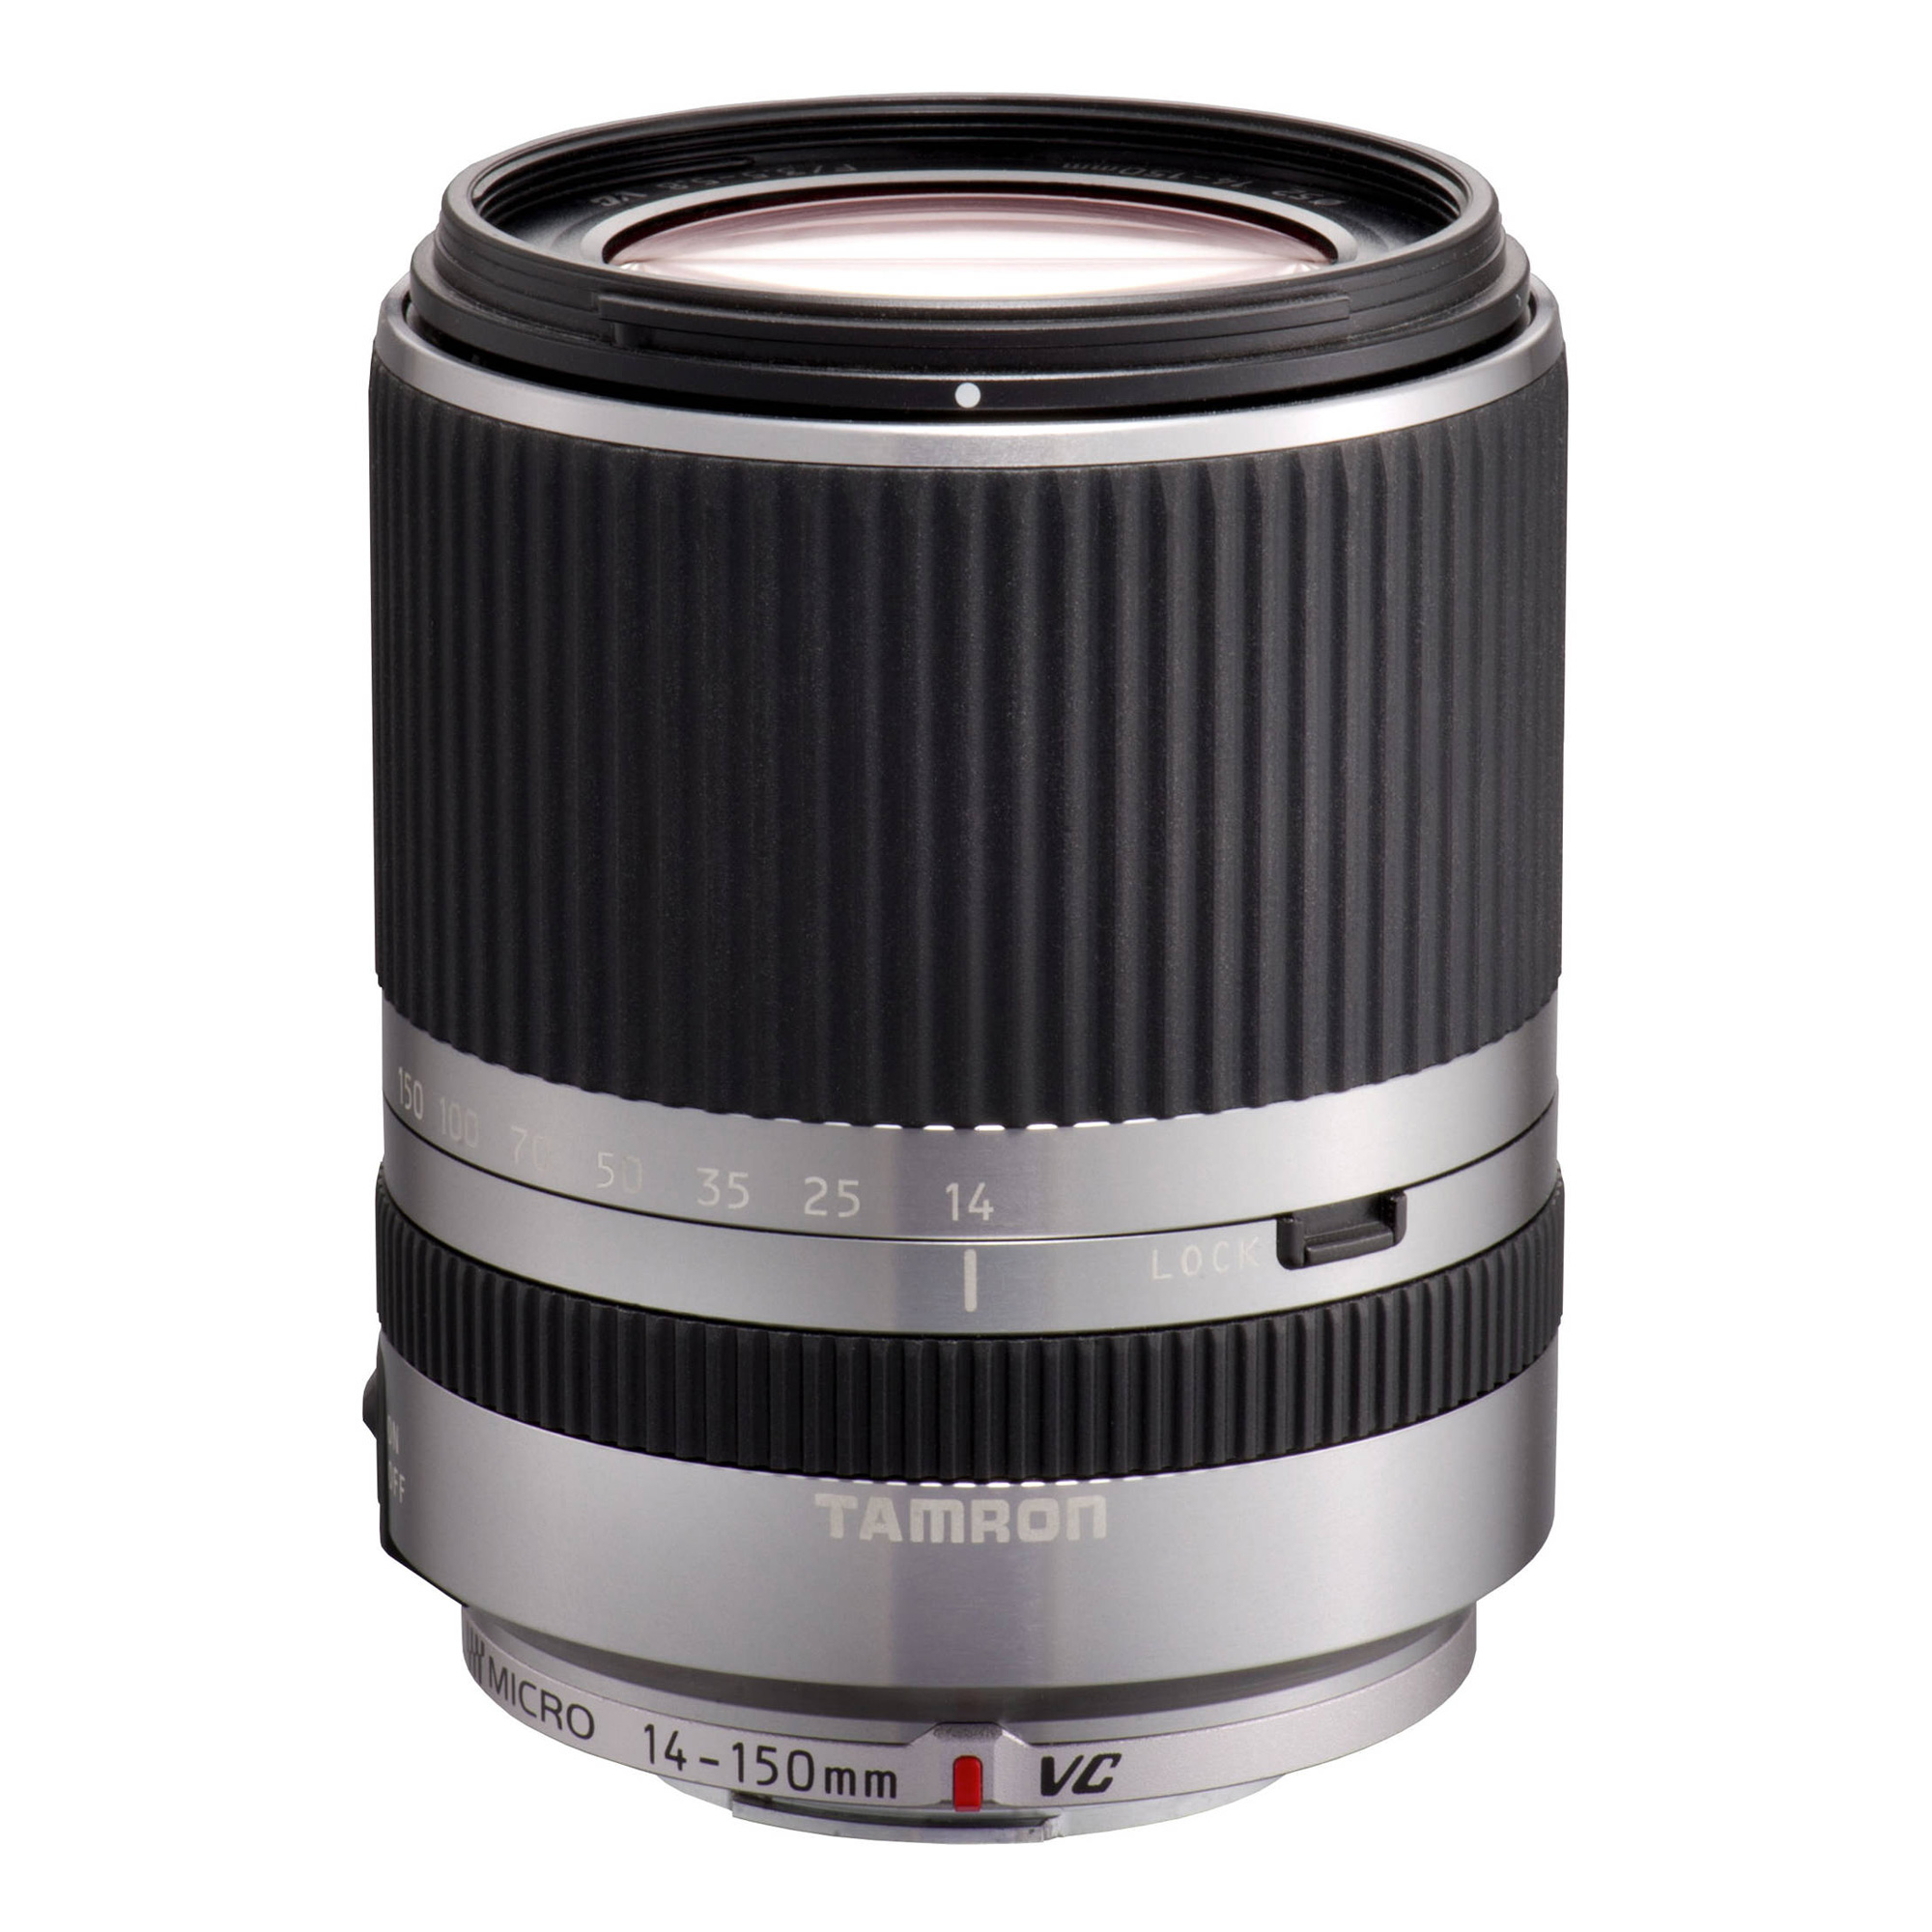 Tamron 14-150mm f/3.5-5.8 Di III Lens for Micro Four Thirds Cameras (Silver) - 第 1/1 張圖片